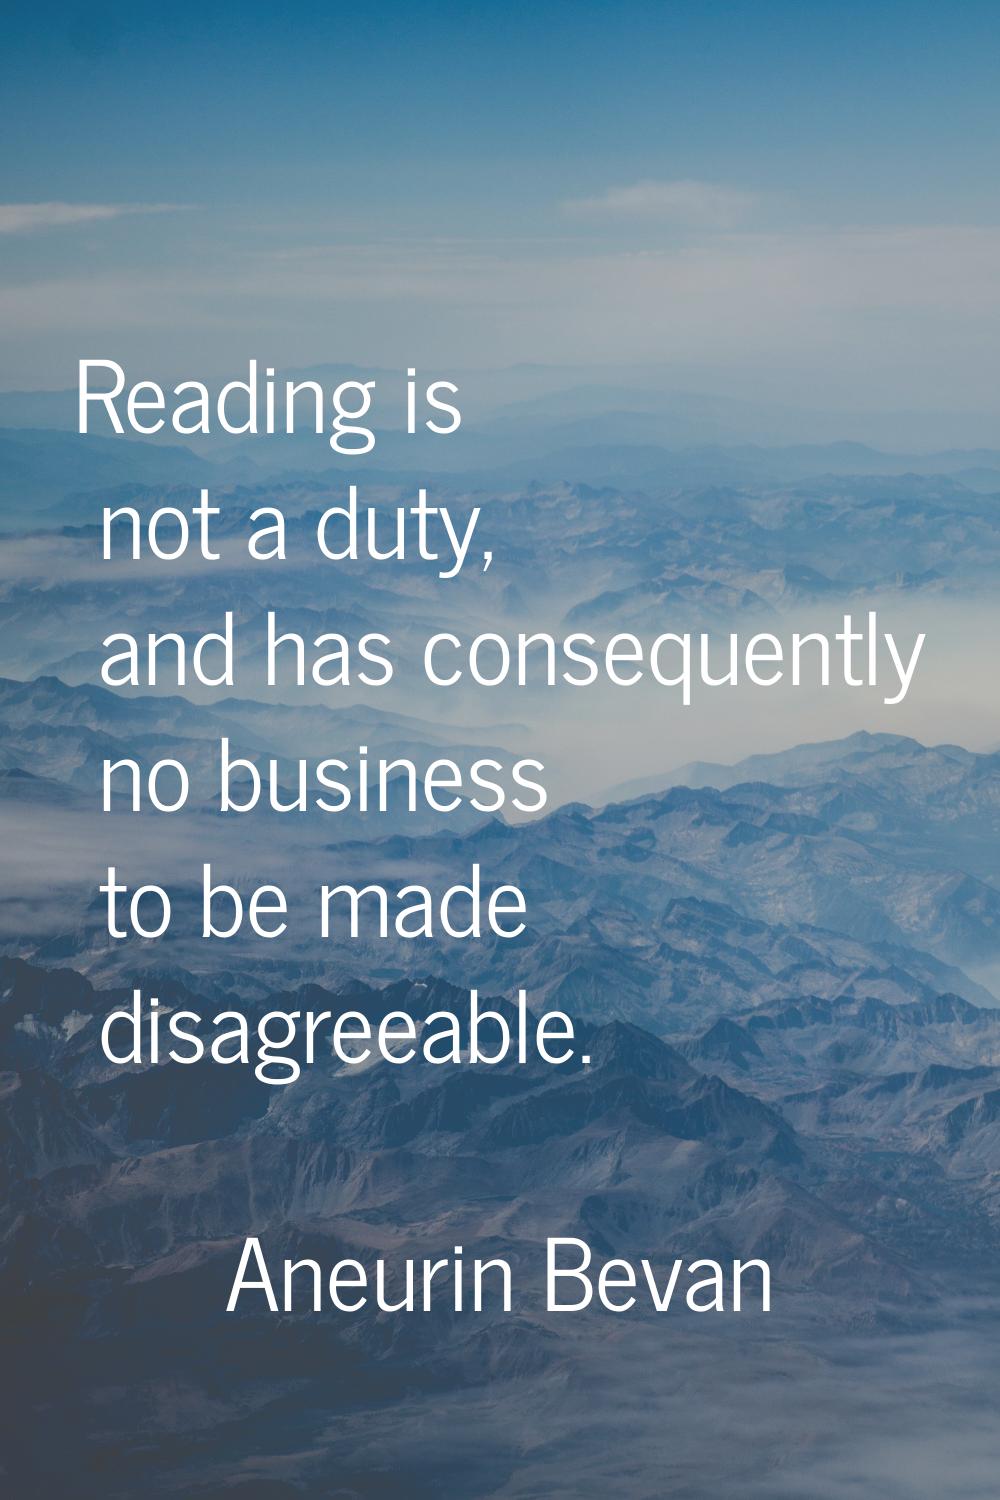 Reading is not a duty, and has consequently no business to be made disagreeable.